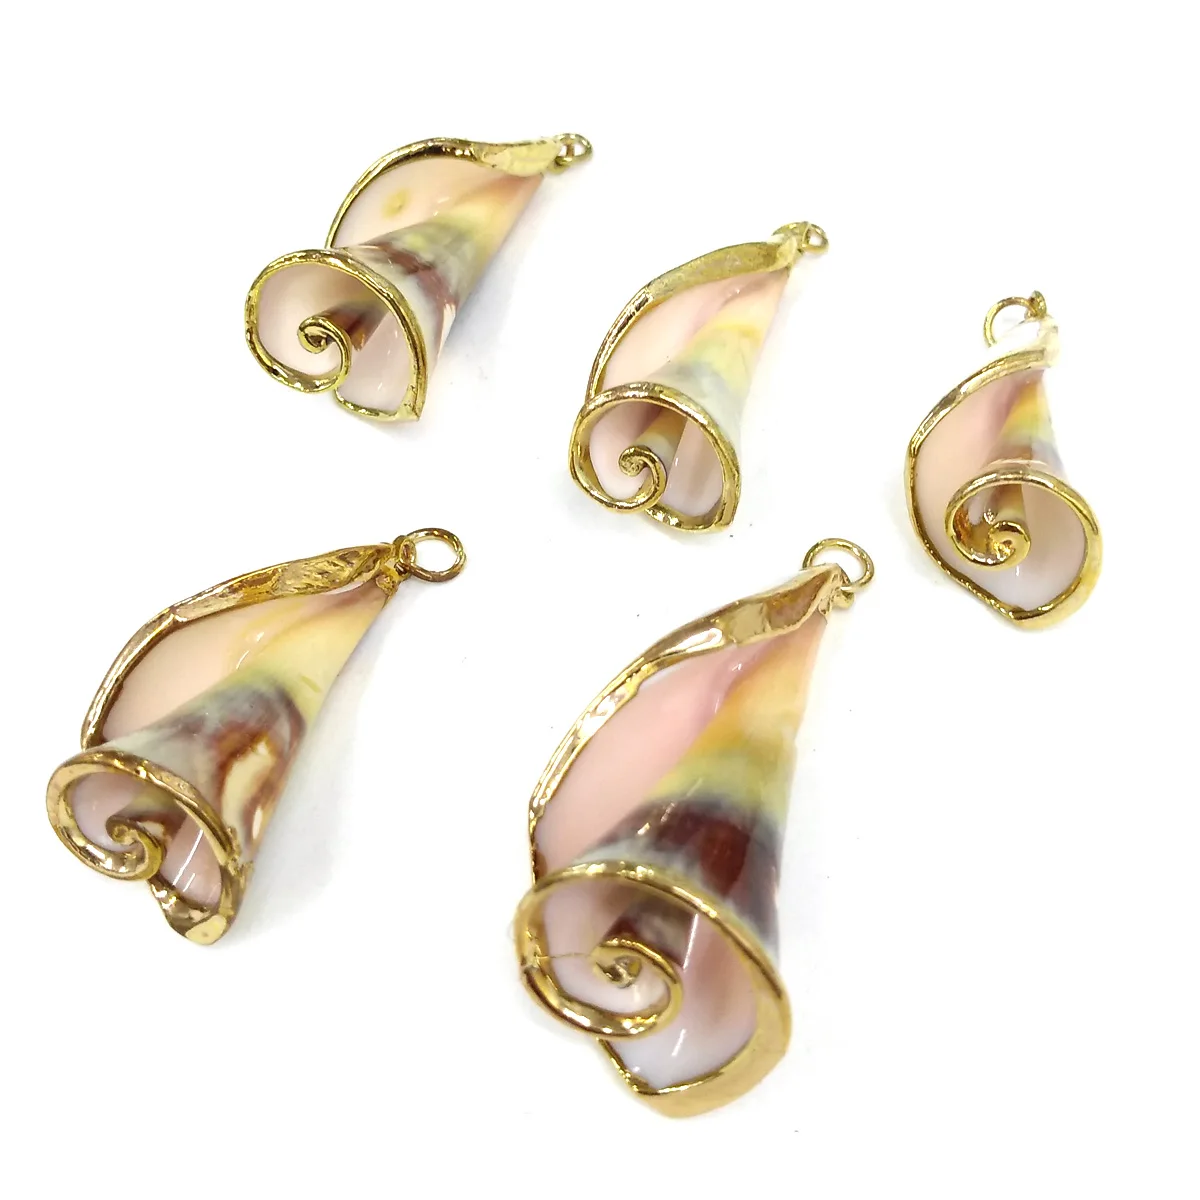 

Natural Conch Shell Pendants Real Sea Snails Pendant Charms for Jewelry Making Necklace Bracelet Earrings Gift